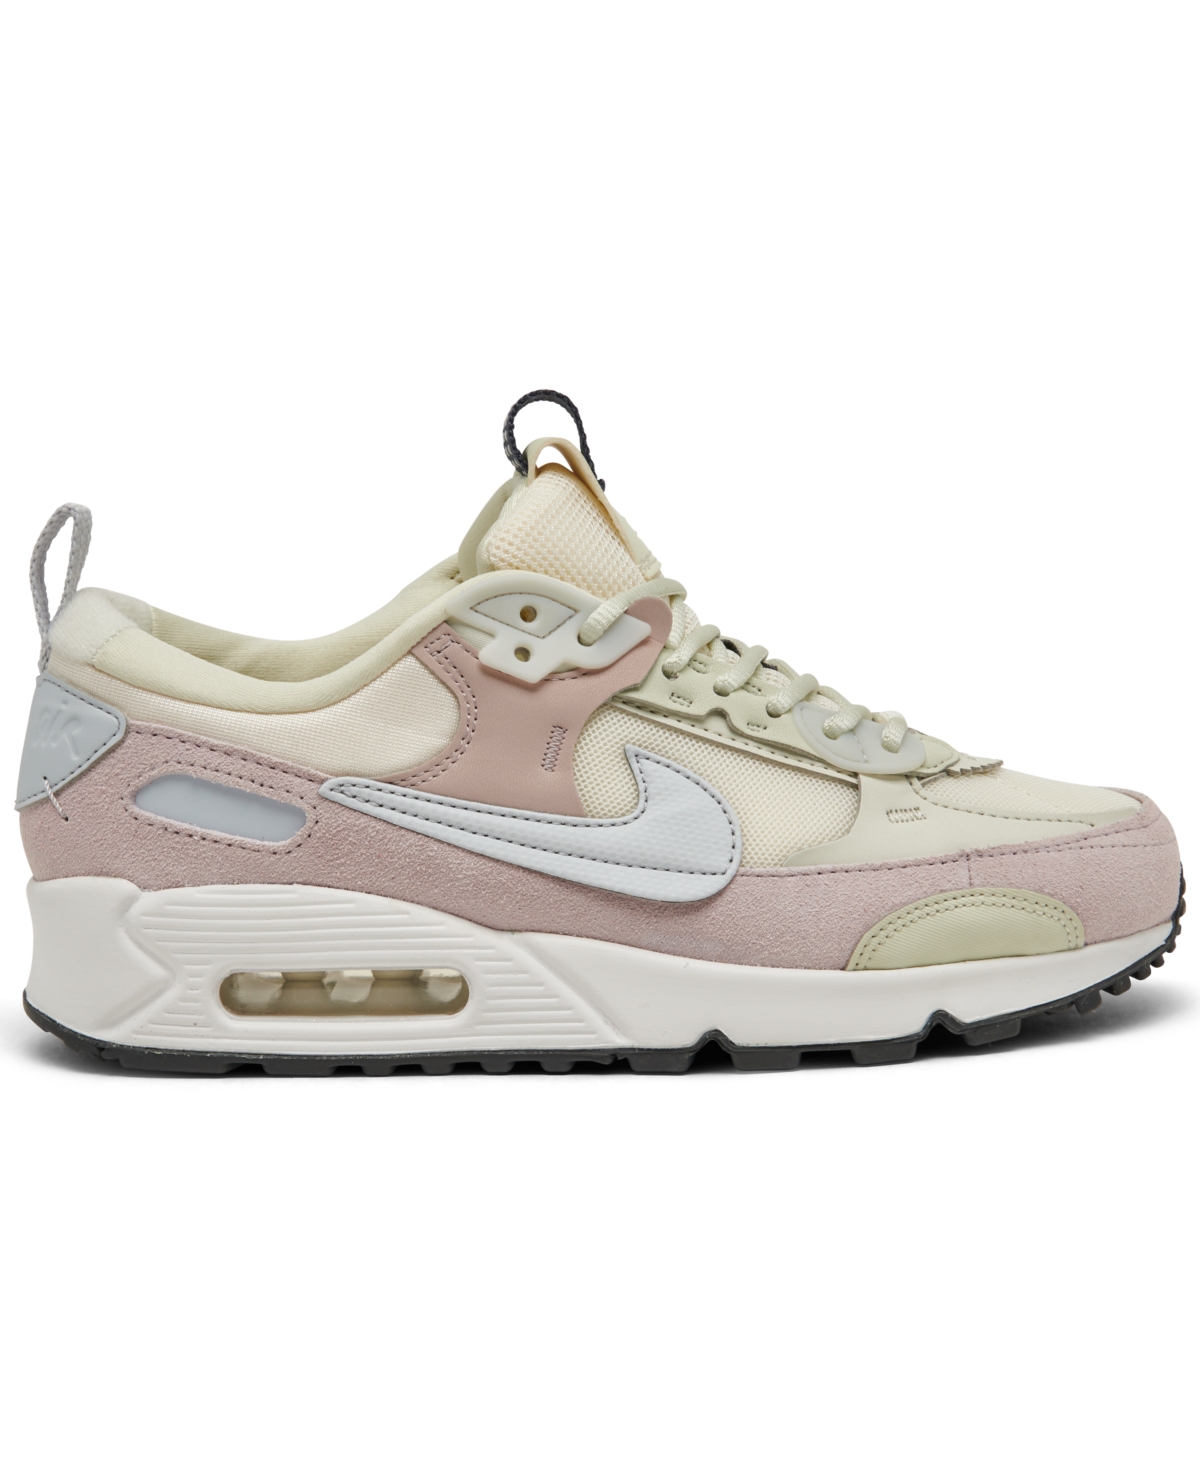 Women's Air Max 90 Futura Casual Sneakers from Finish Line - Pale Ivory/Platinum Viole